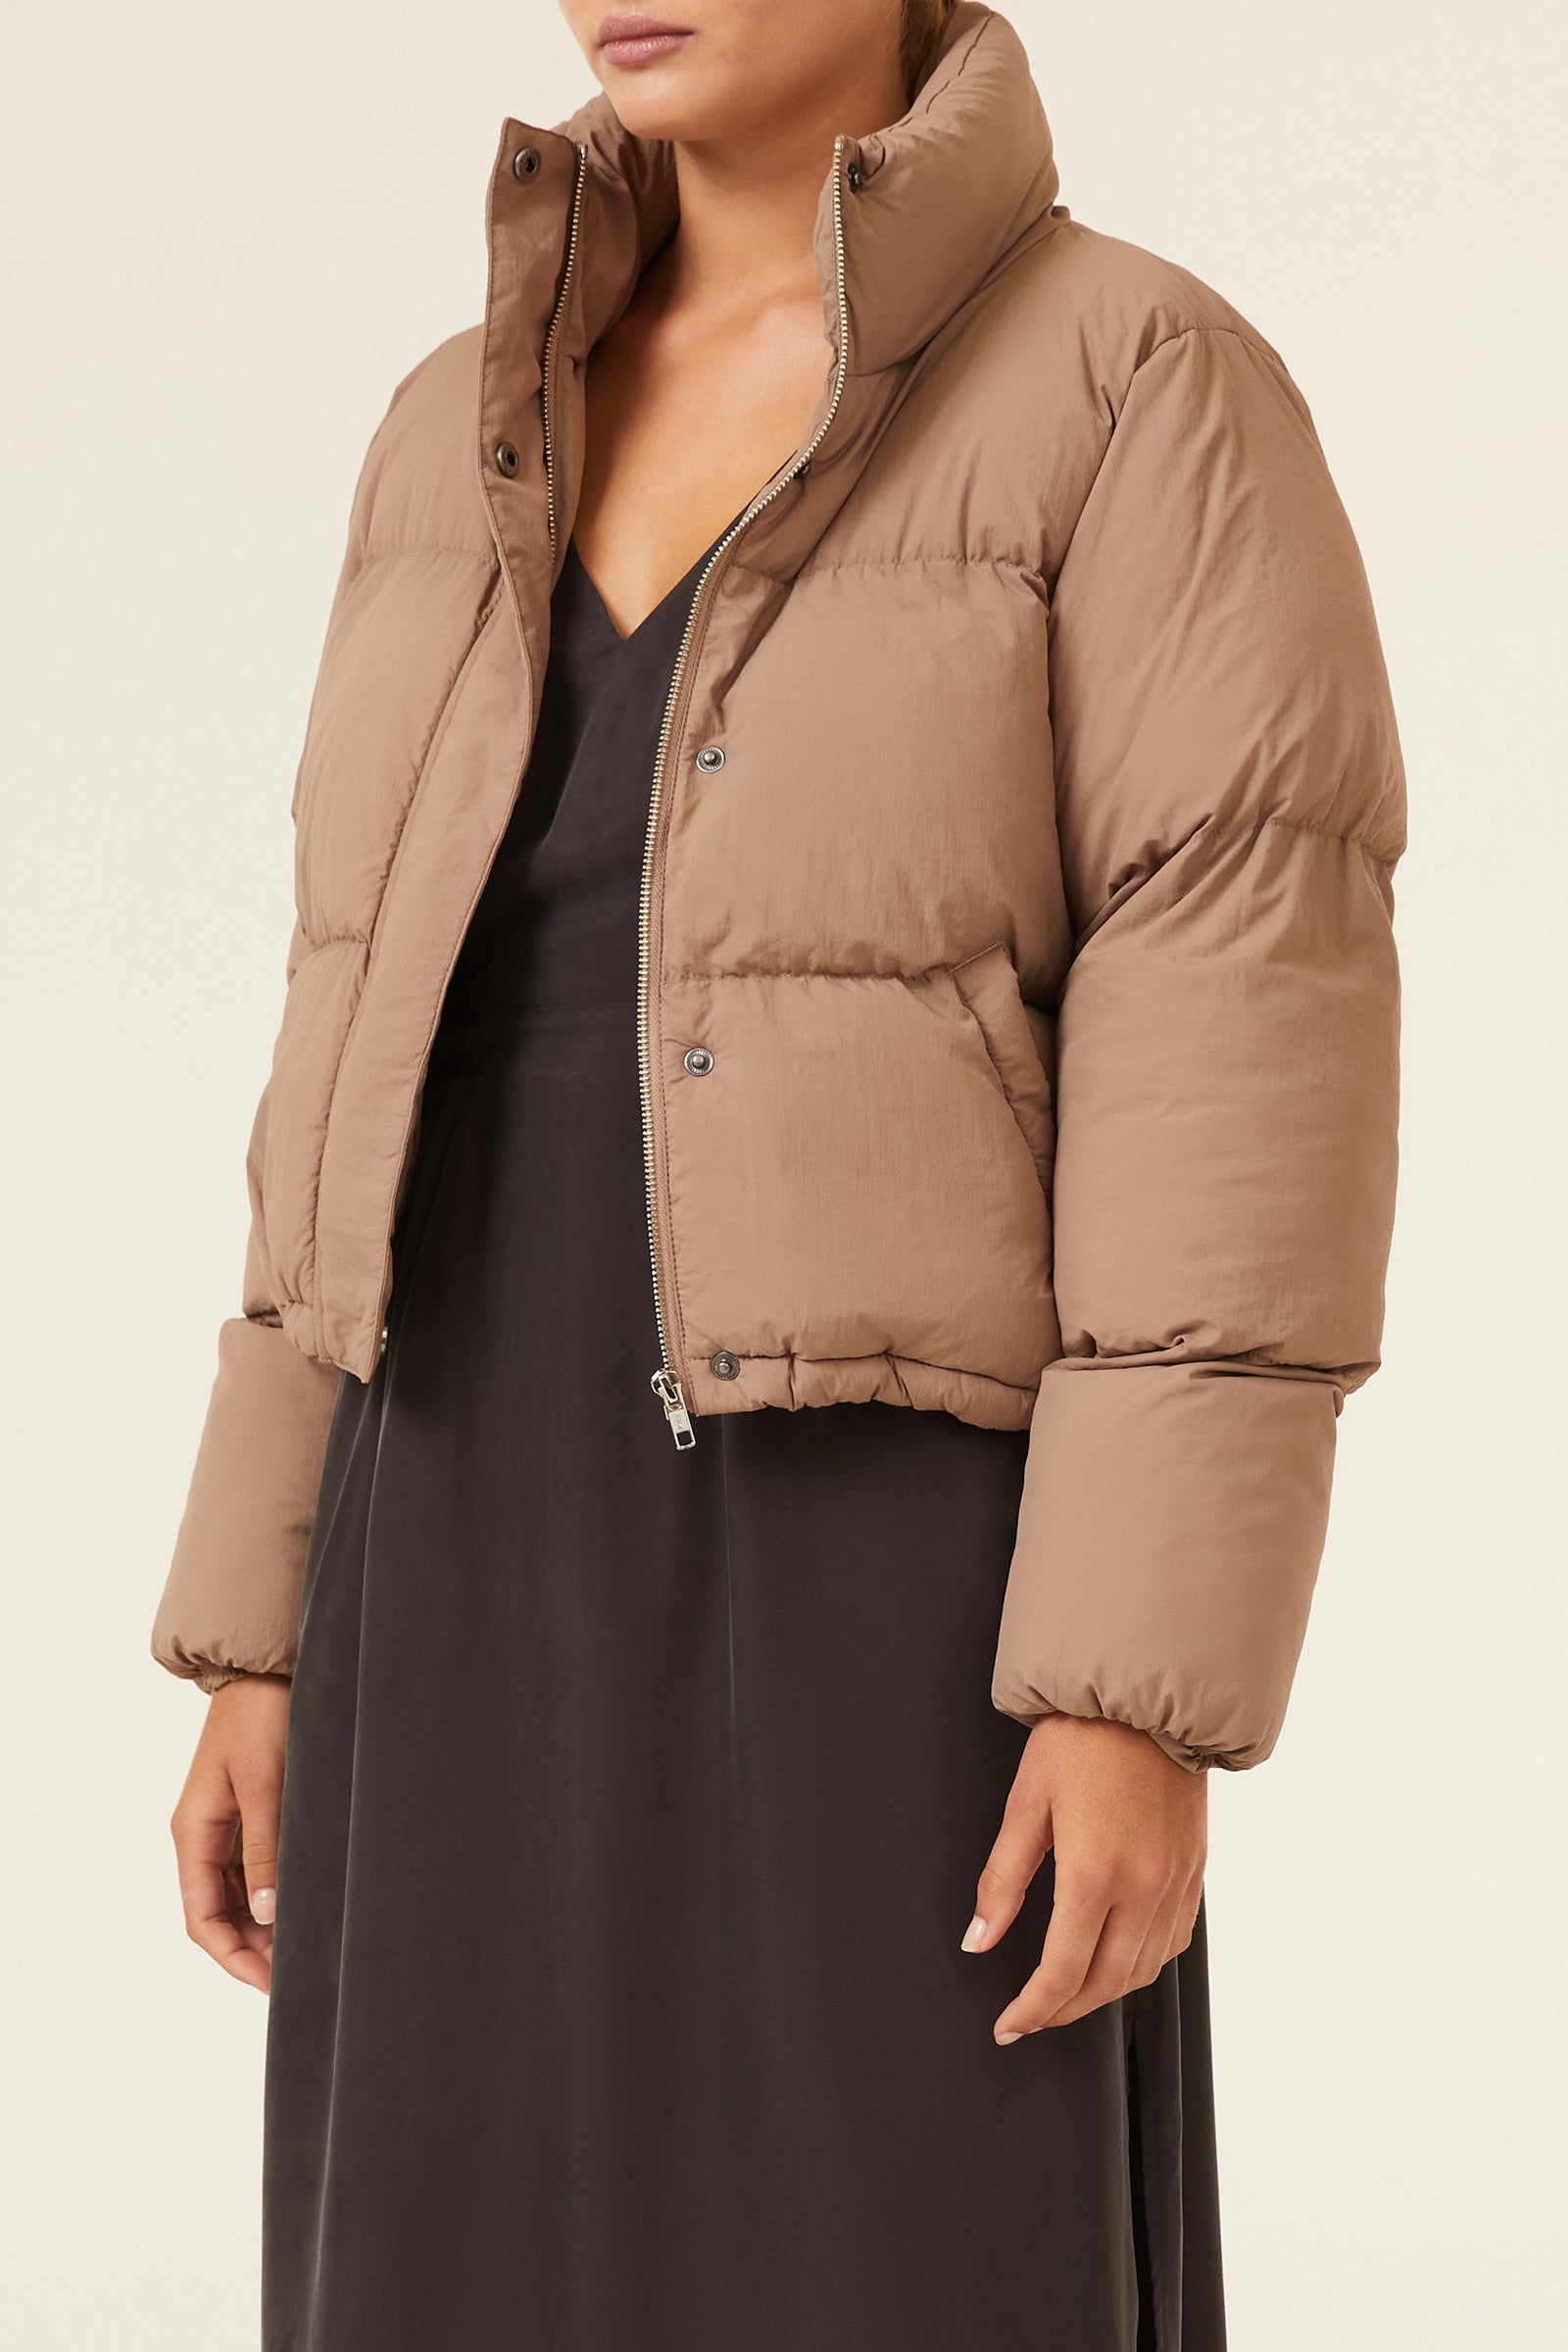 Nude Lucy Topher Puffer Jacket In A Brown Carob Colour 